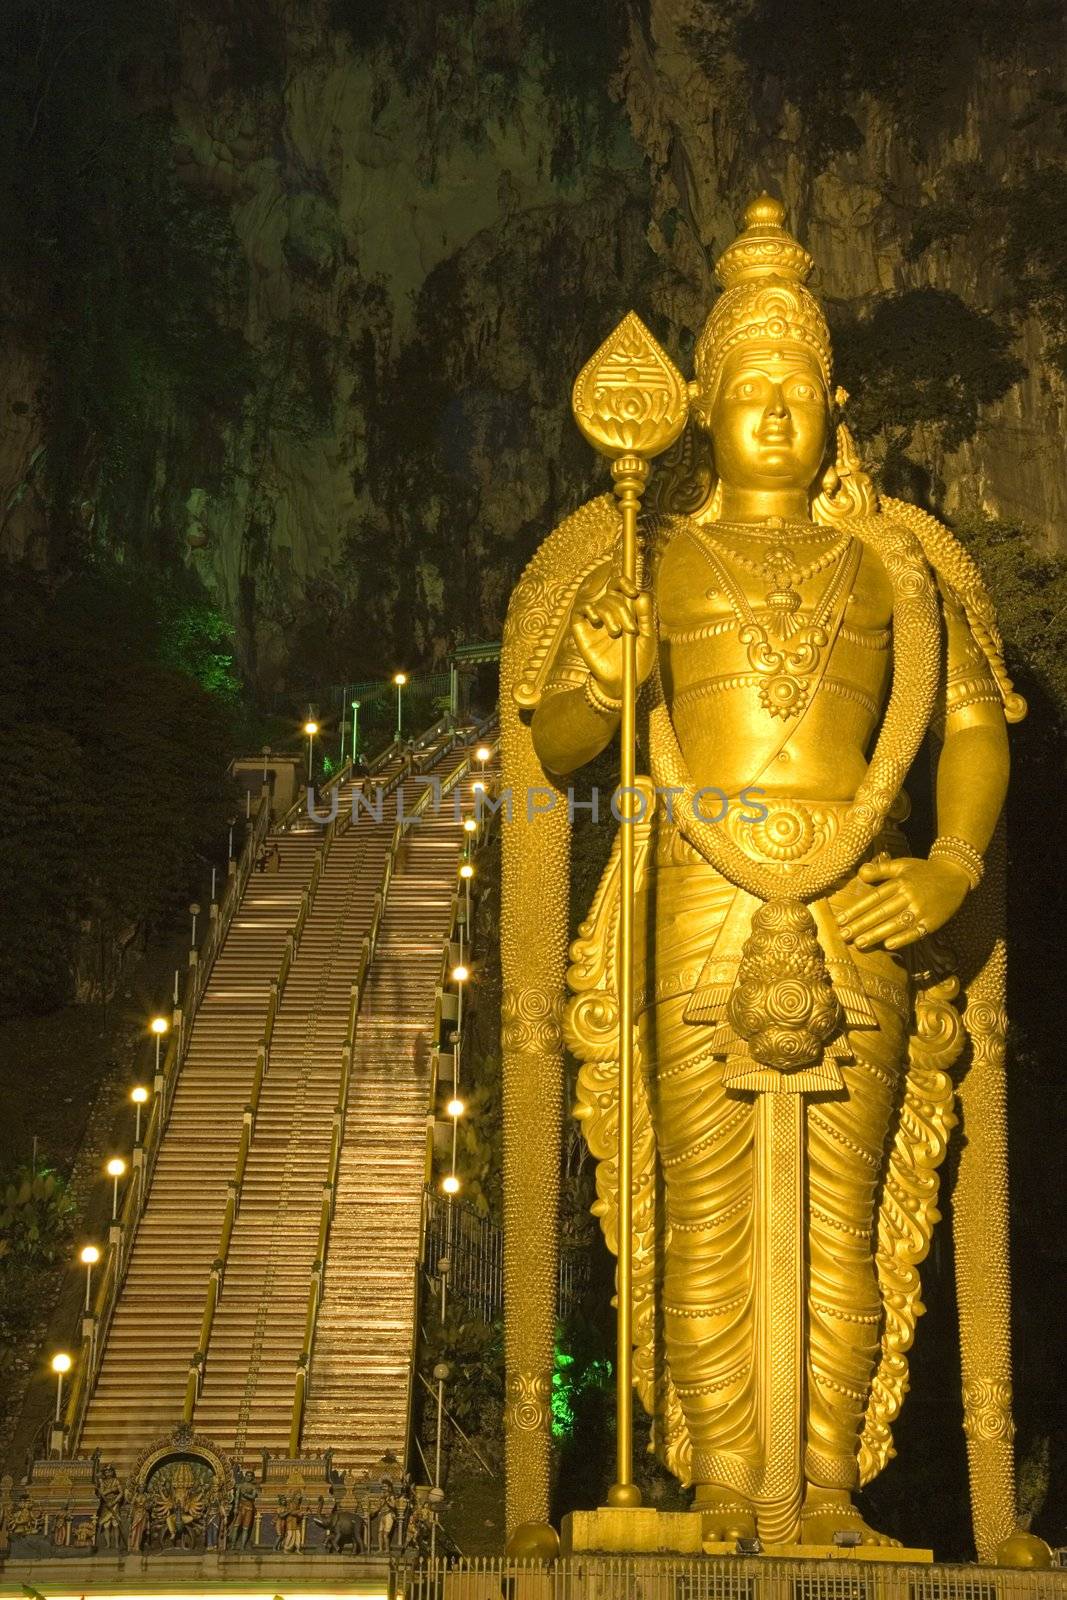 Night image of Batu Caves in Malaysia. In the foreground is the world's tallest (42.7 meters) statue of Lord Muruga, a Hindu deity. Also seen here is the stairway to the caves.